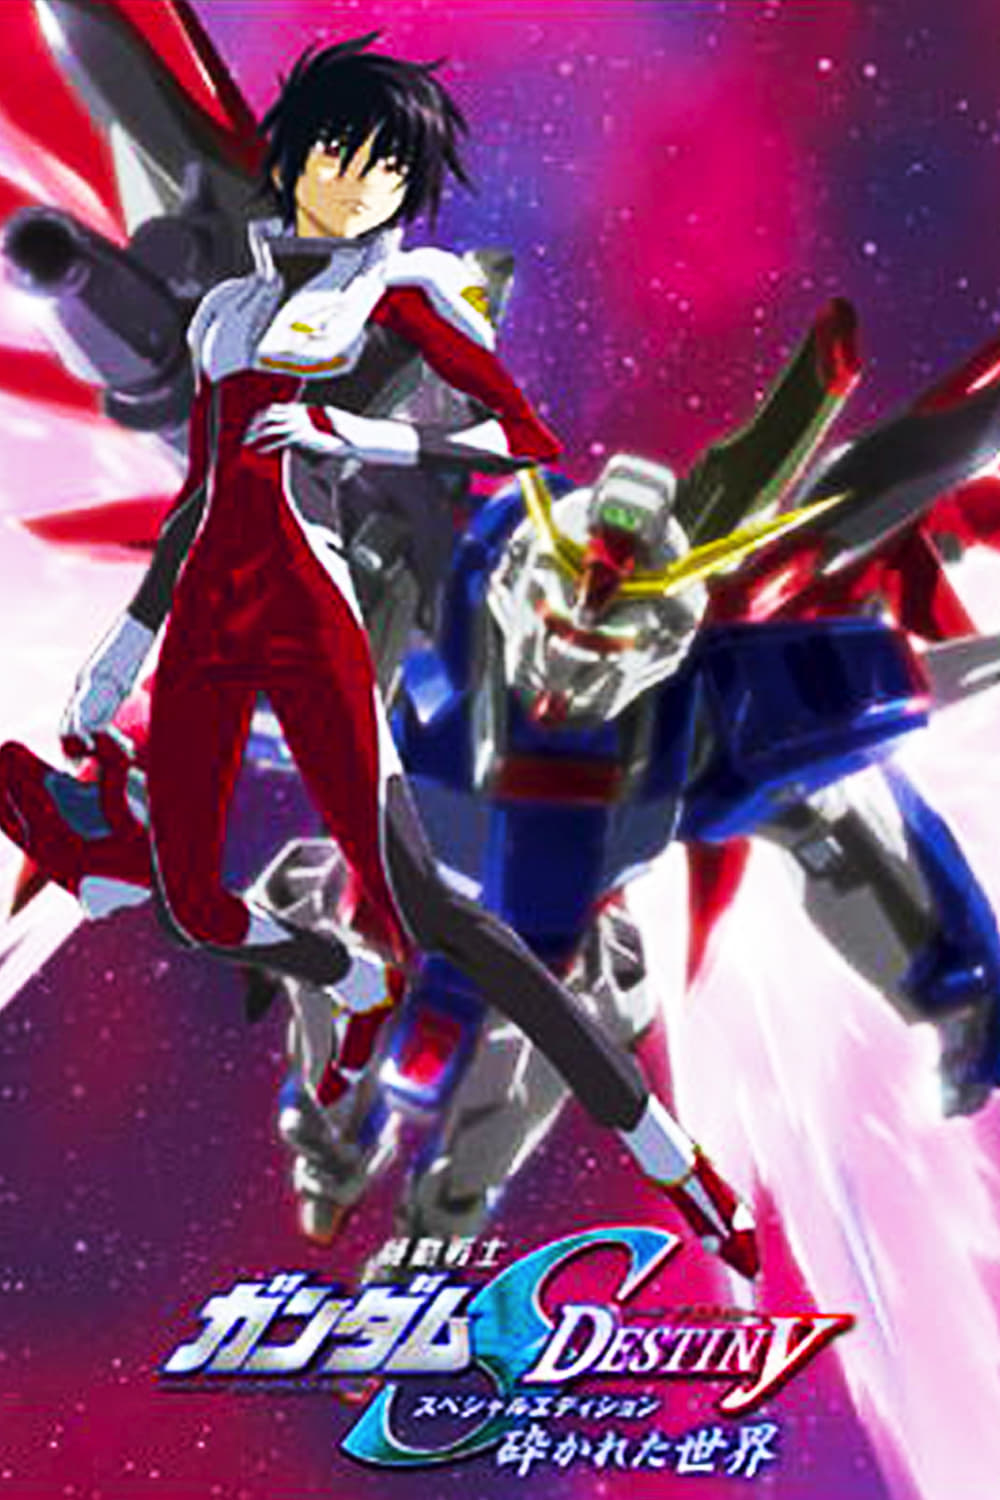 Mobile Suit Gundam SEED Destiny: Special Edition I - The Broken World